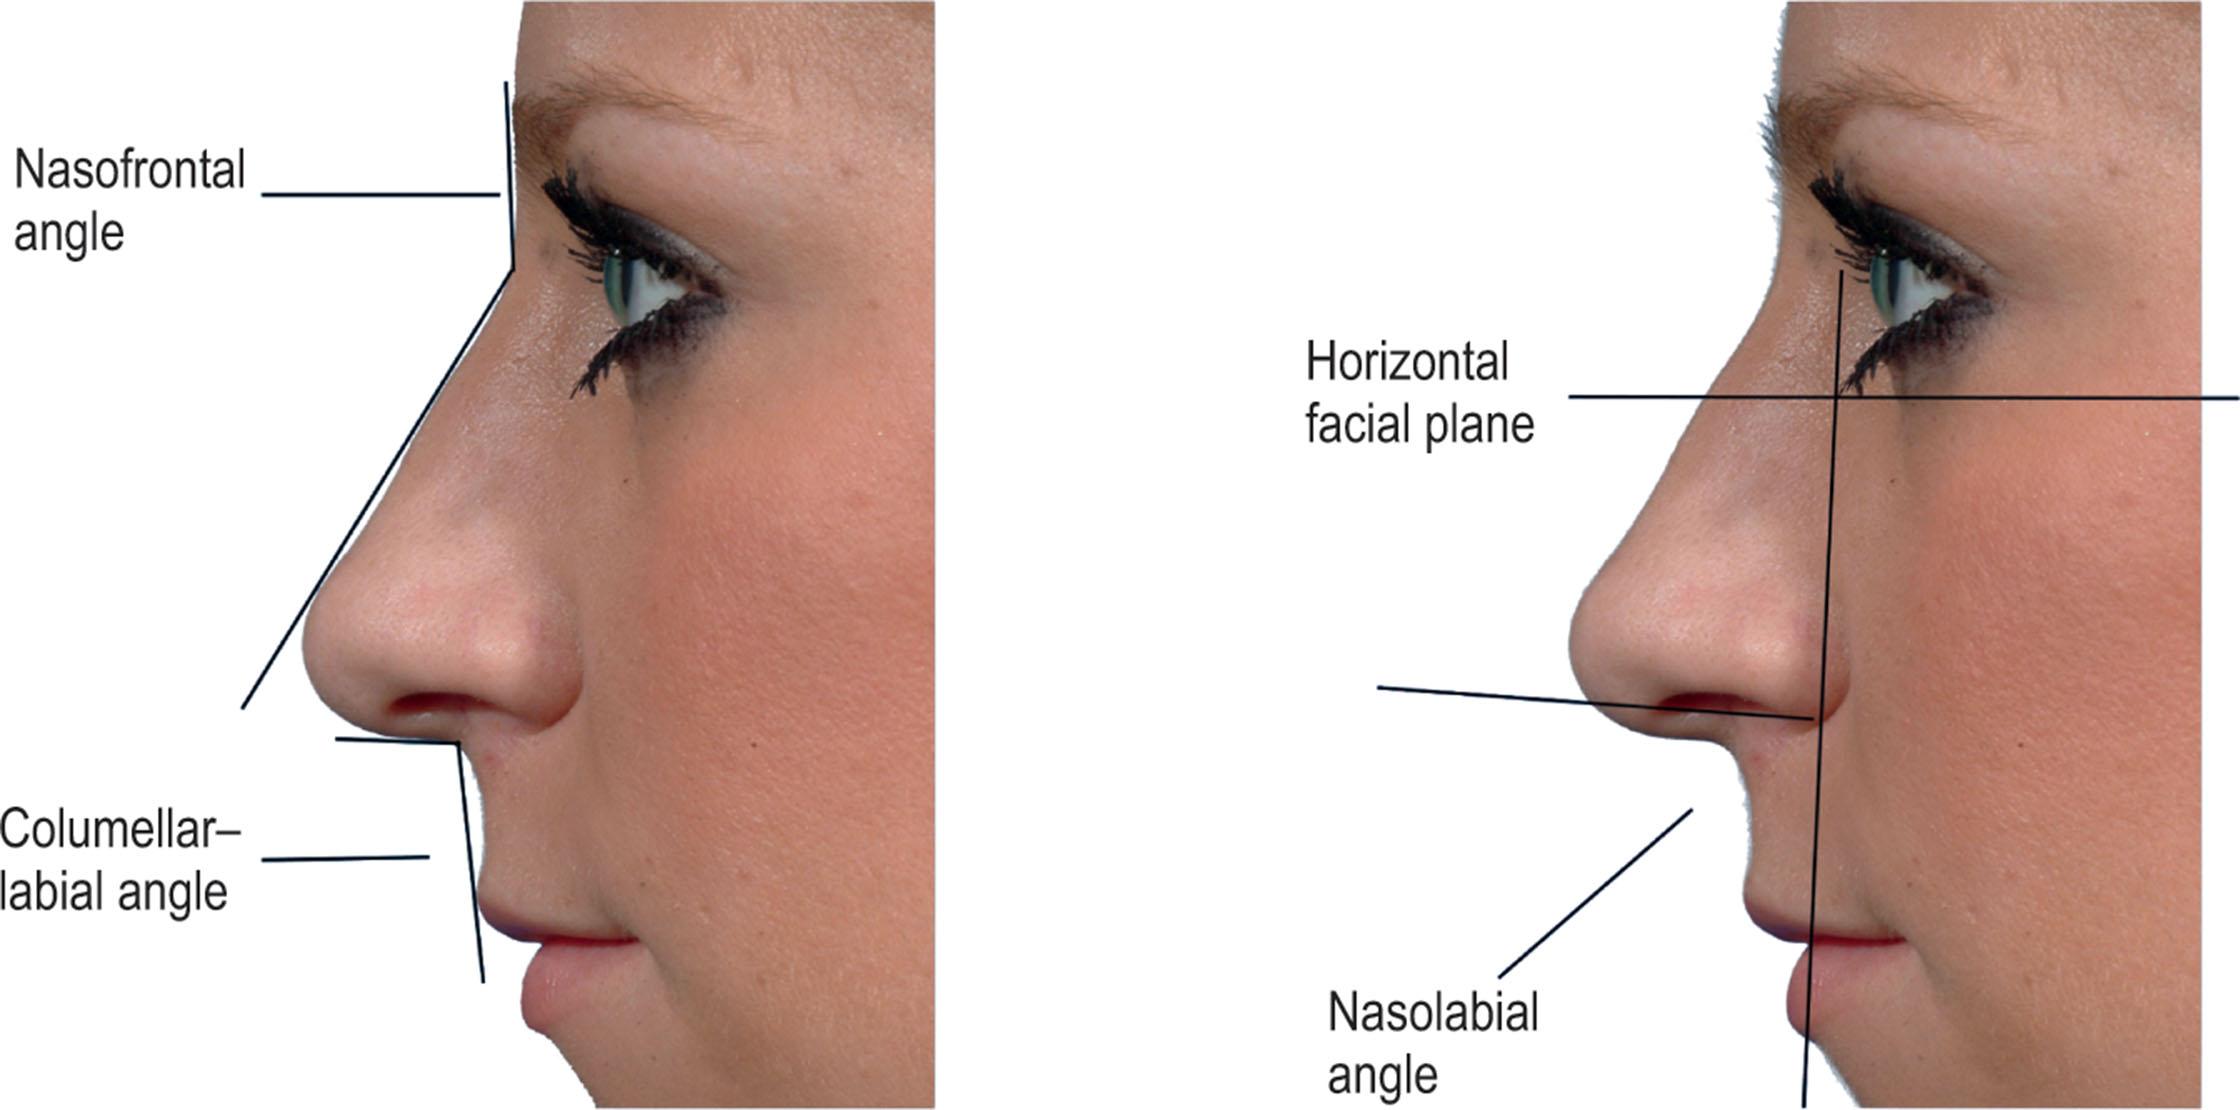 Figure 18.2, Angular measurements assess multiple factors, such as nasal length, alar base position, and lip aesthetics.